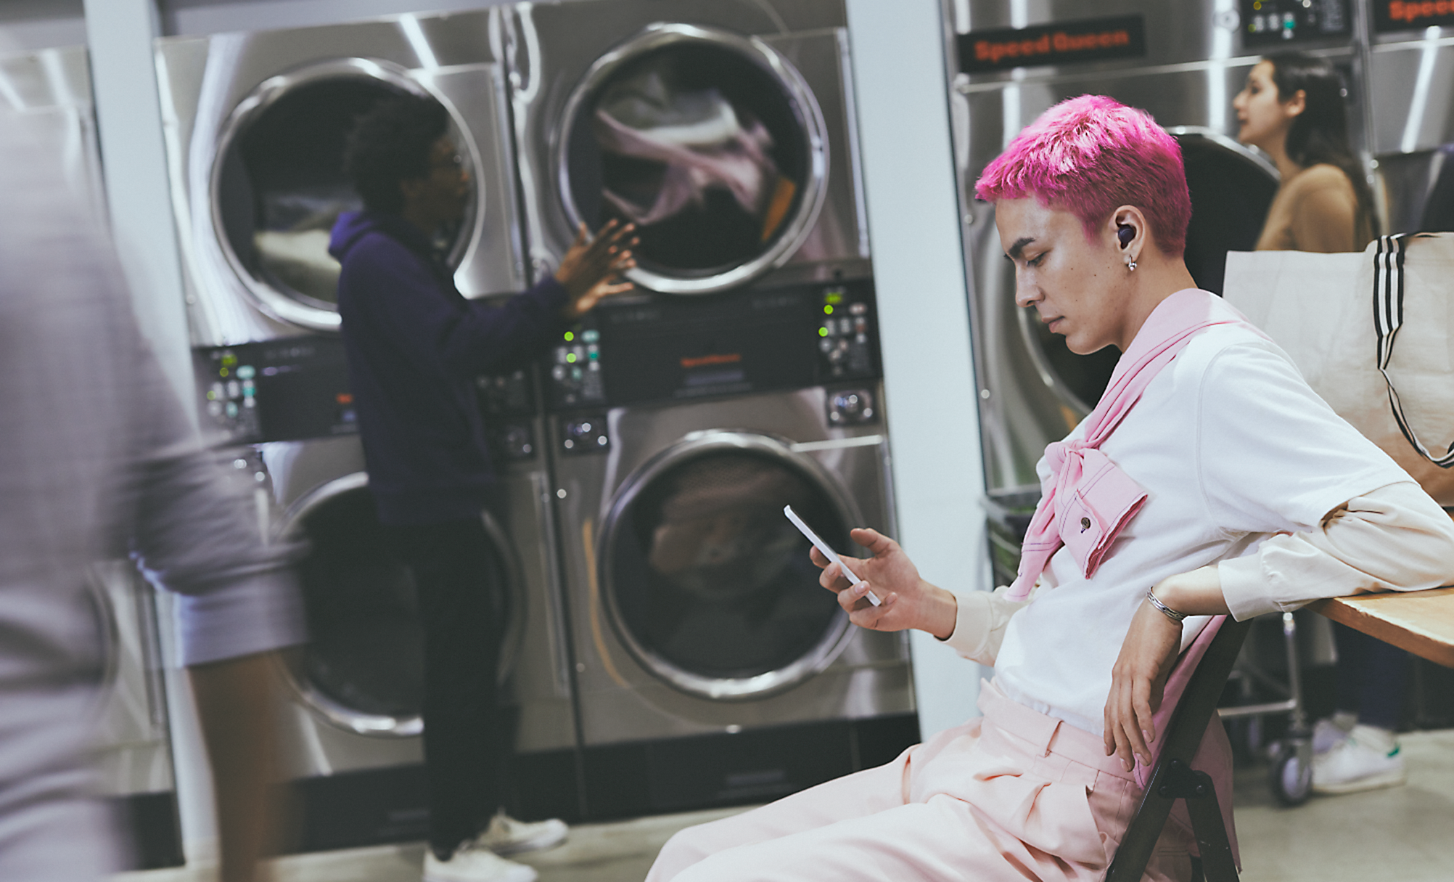 Image of a person sitting in a laundrette looking at their phone and wearing WF-C700N Wireless Noise Cancelling headphones